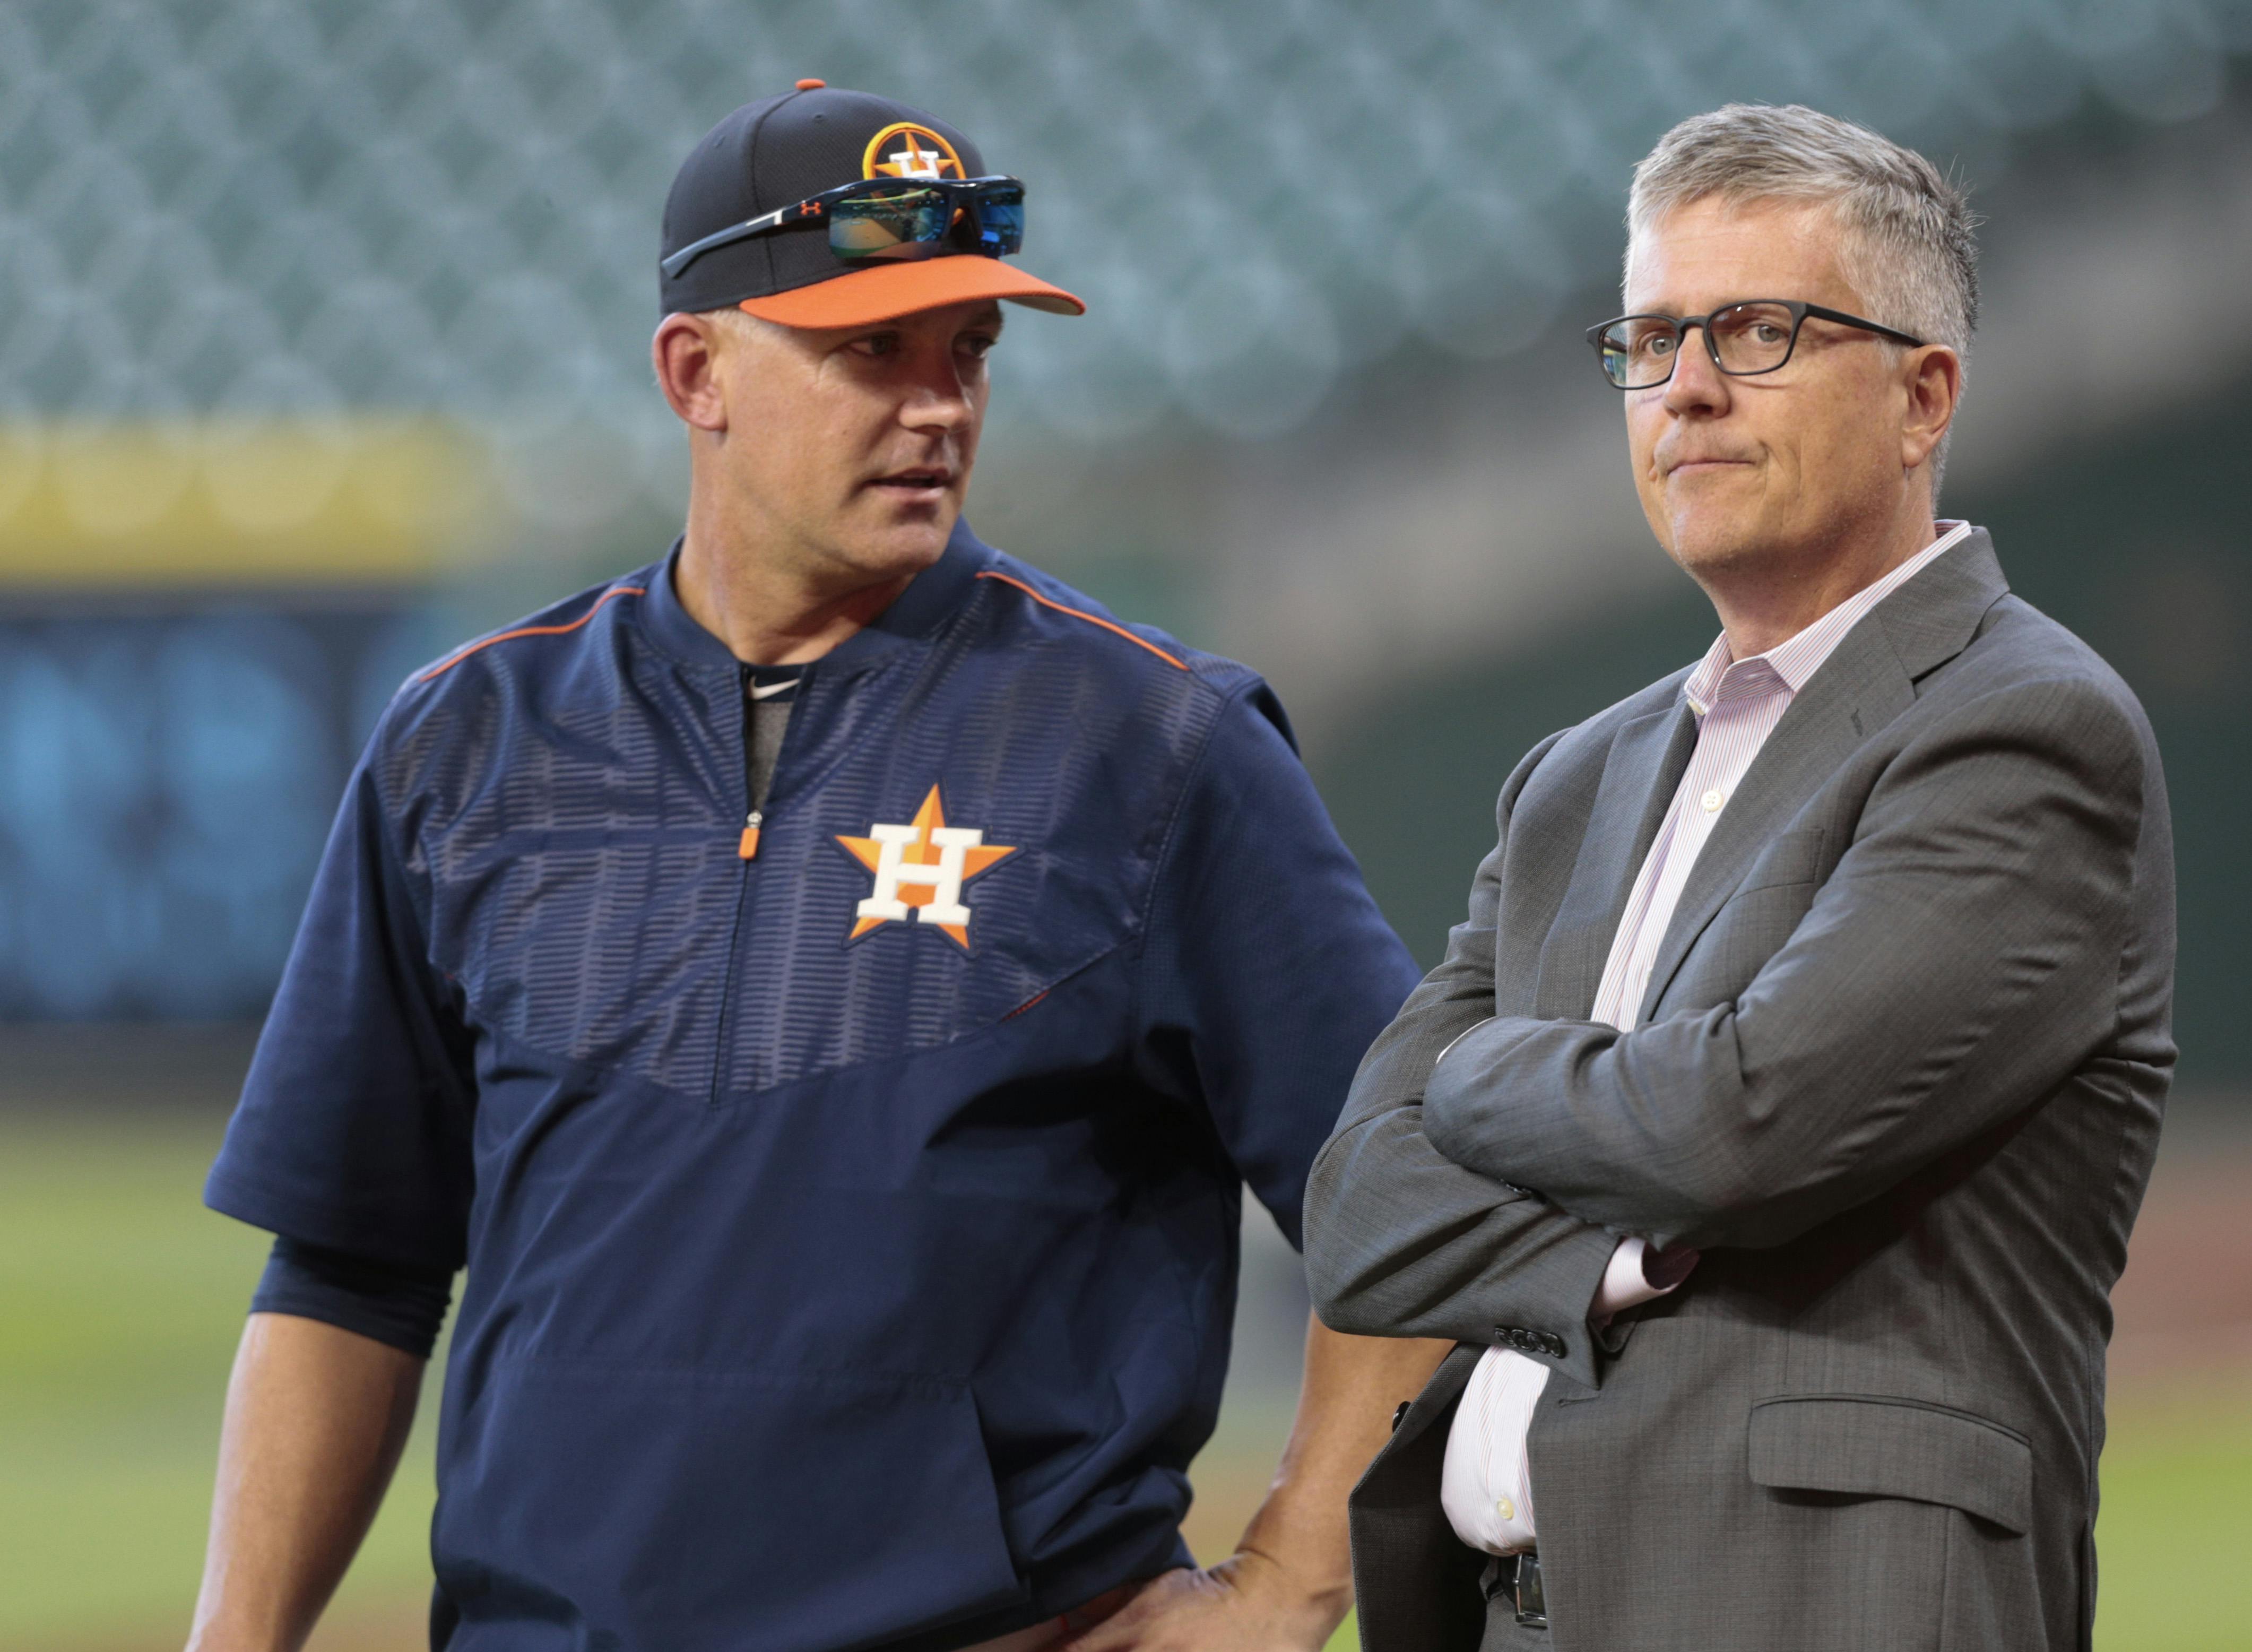 VIDEO: It Seems the Astros Also May Have Been Cheating in 2019 Based on  This Evidence